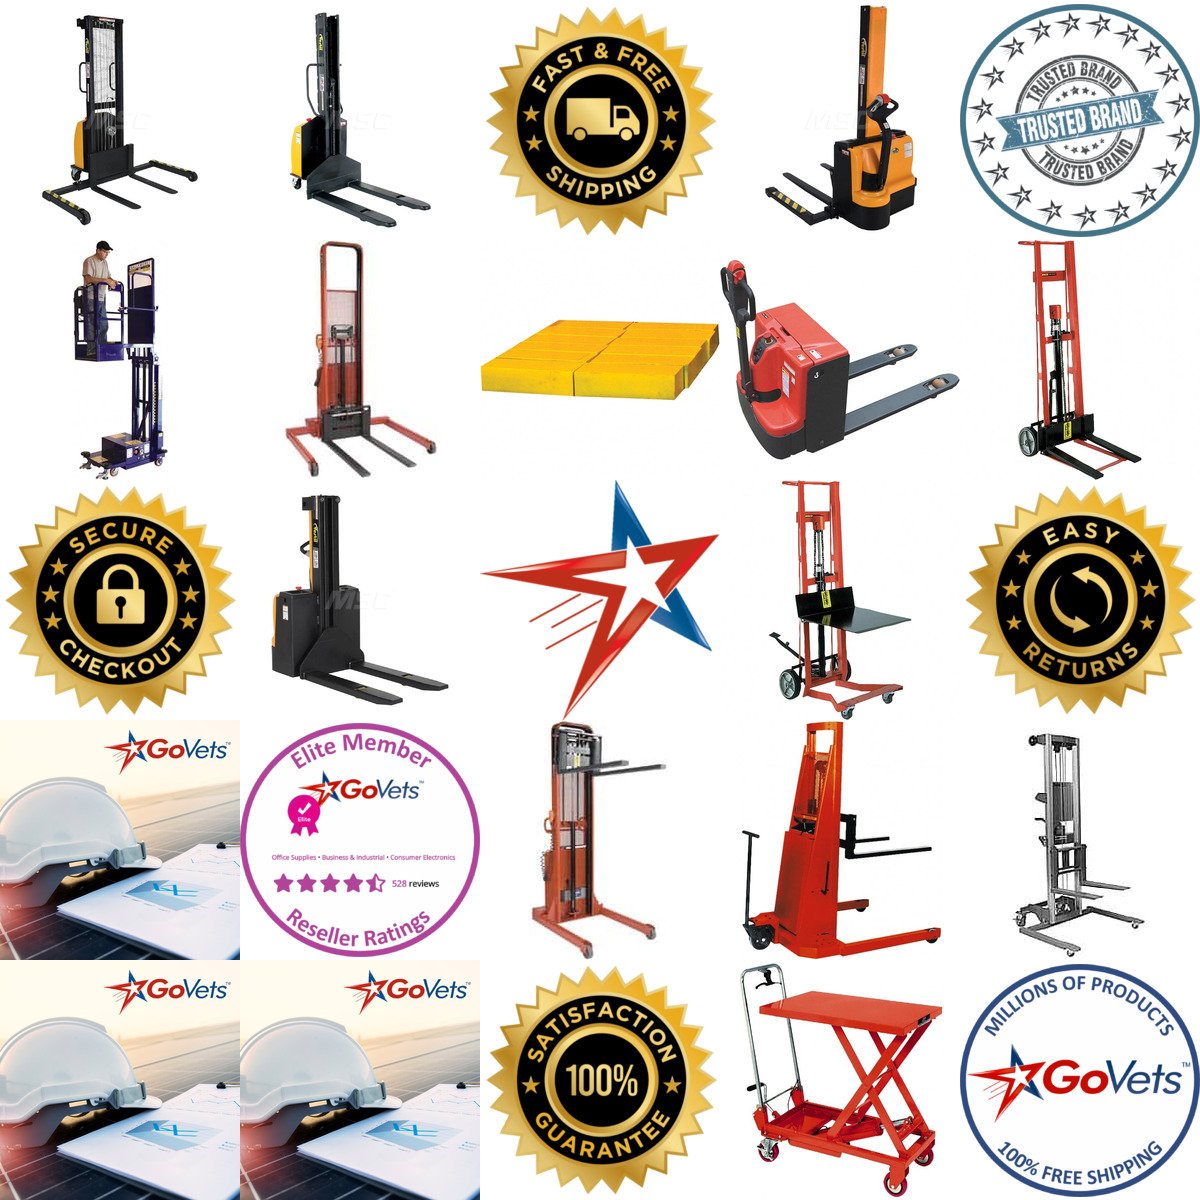 A selection of Stackers and Mobile Lifts products on GoVets